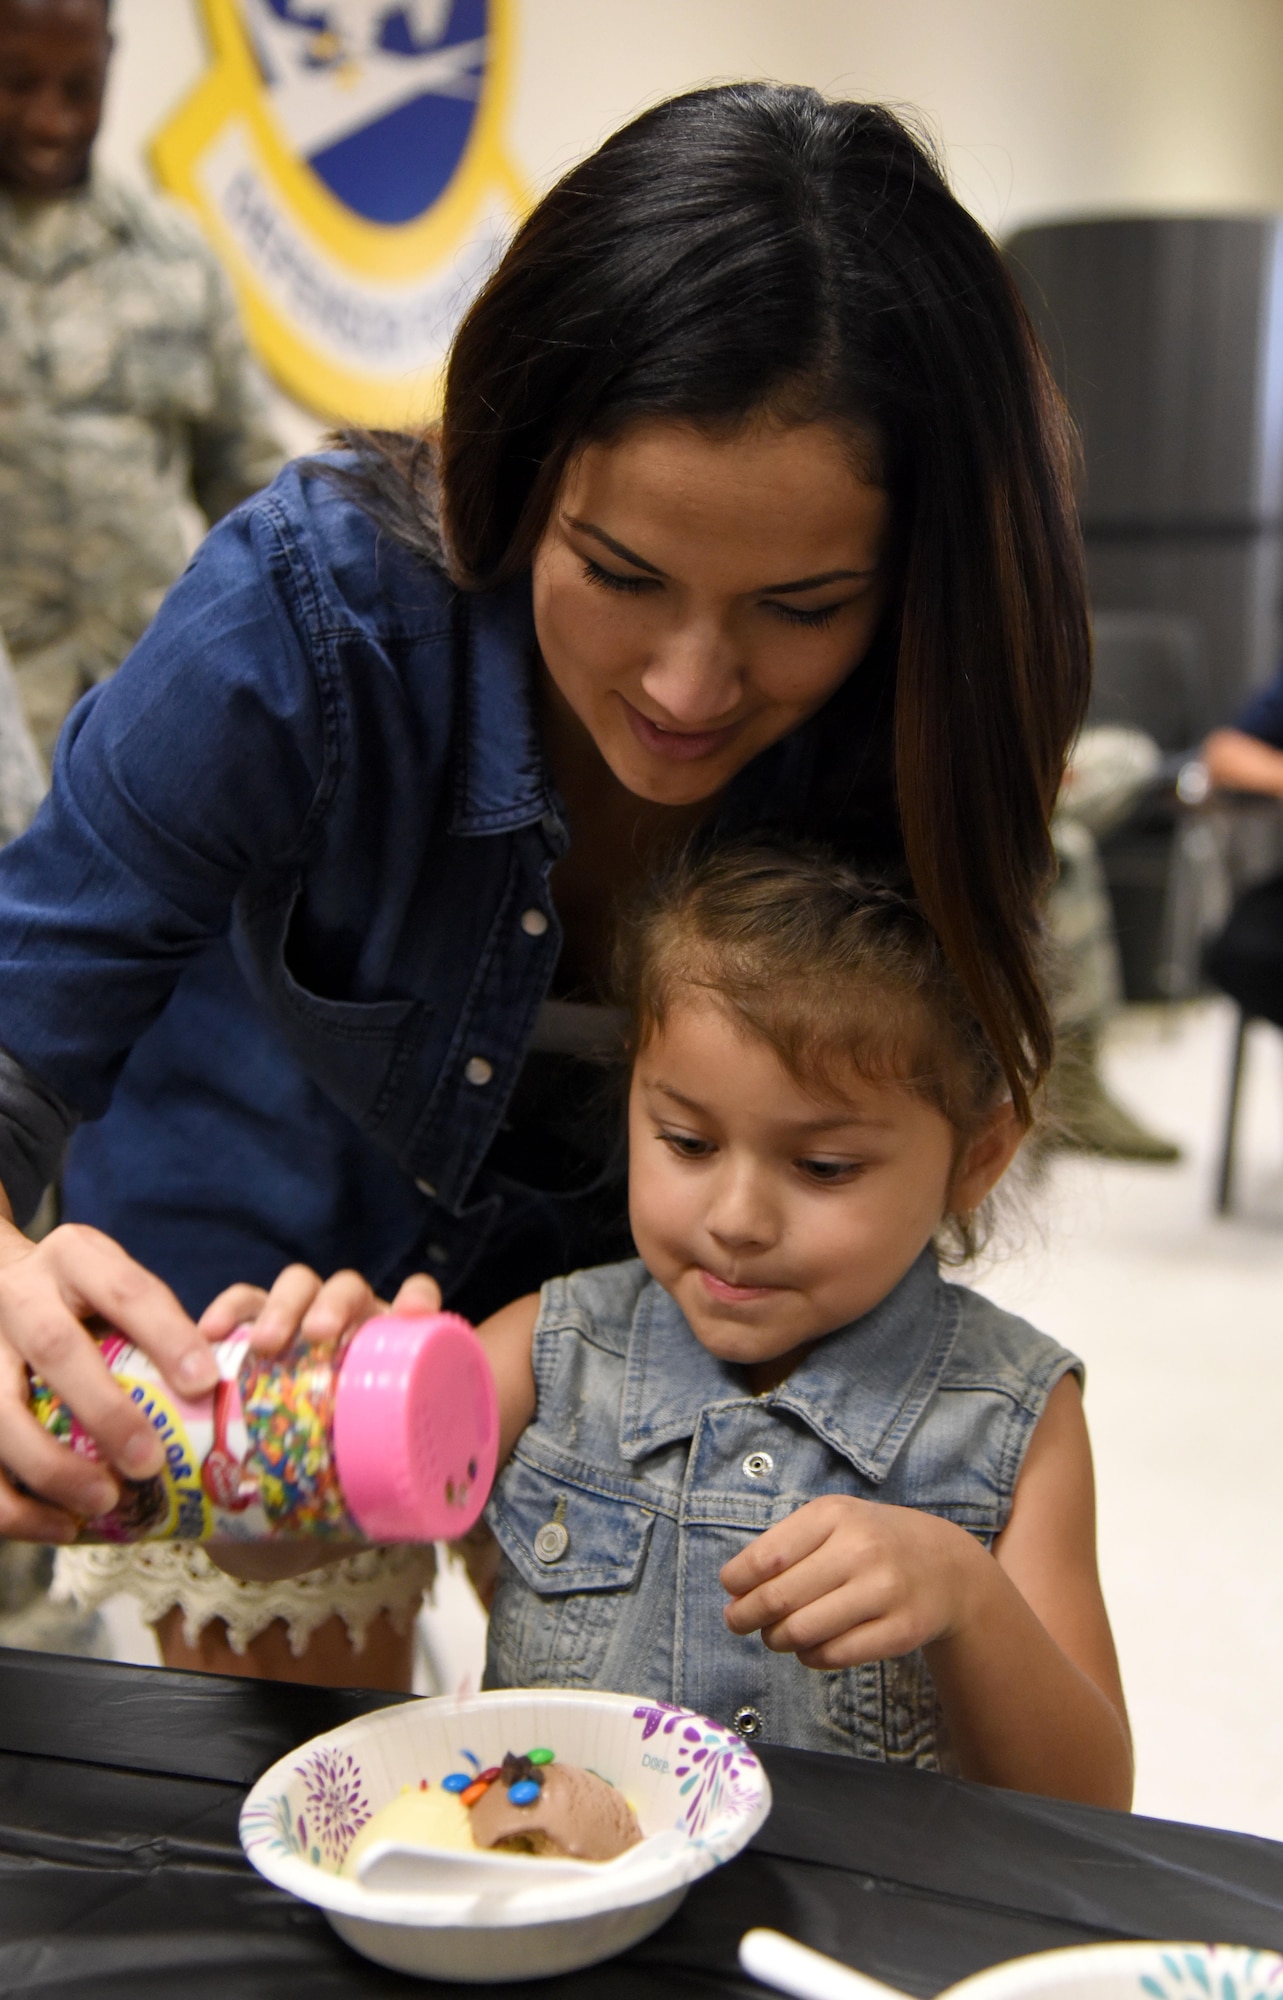 Priscilla and Rosalie Murray, family members of Maj. Jonathon Murray, 81st Security Forces Squadron commander, sprinkle candy on their ice cream during a family ice cream social at the 81st SFS building July 27, 2017, on Keesler Air Force Base, Miss. The event, hosted by the 81st SFS Defenders Council and Key Spouses, also consisted of a military working dog demonstration and a combat arms weapons display. (U.S. Air Force photo by Kemberly Groue)